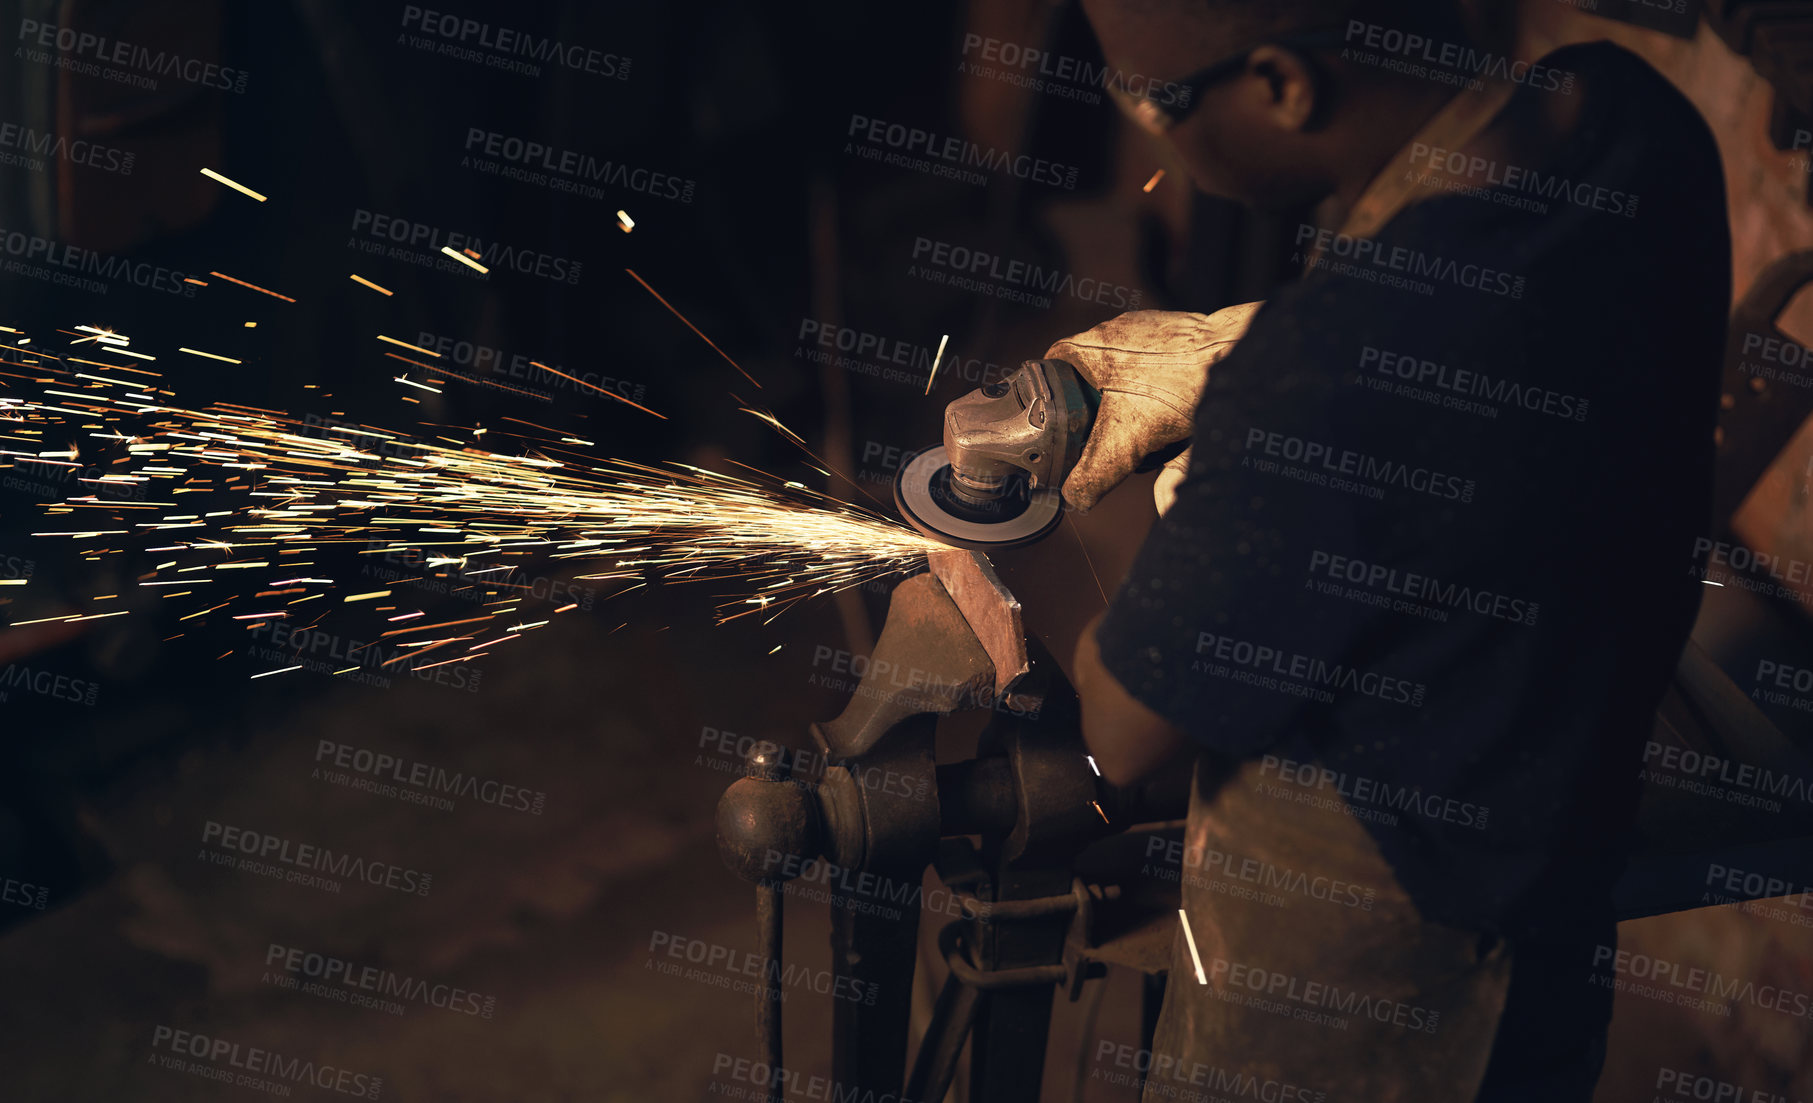 Buy stock photo Shot of a man using an angle grinder while working at a foundry